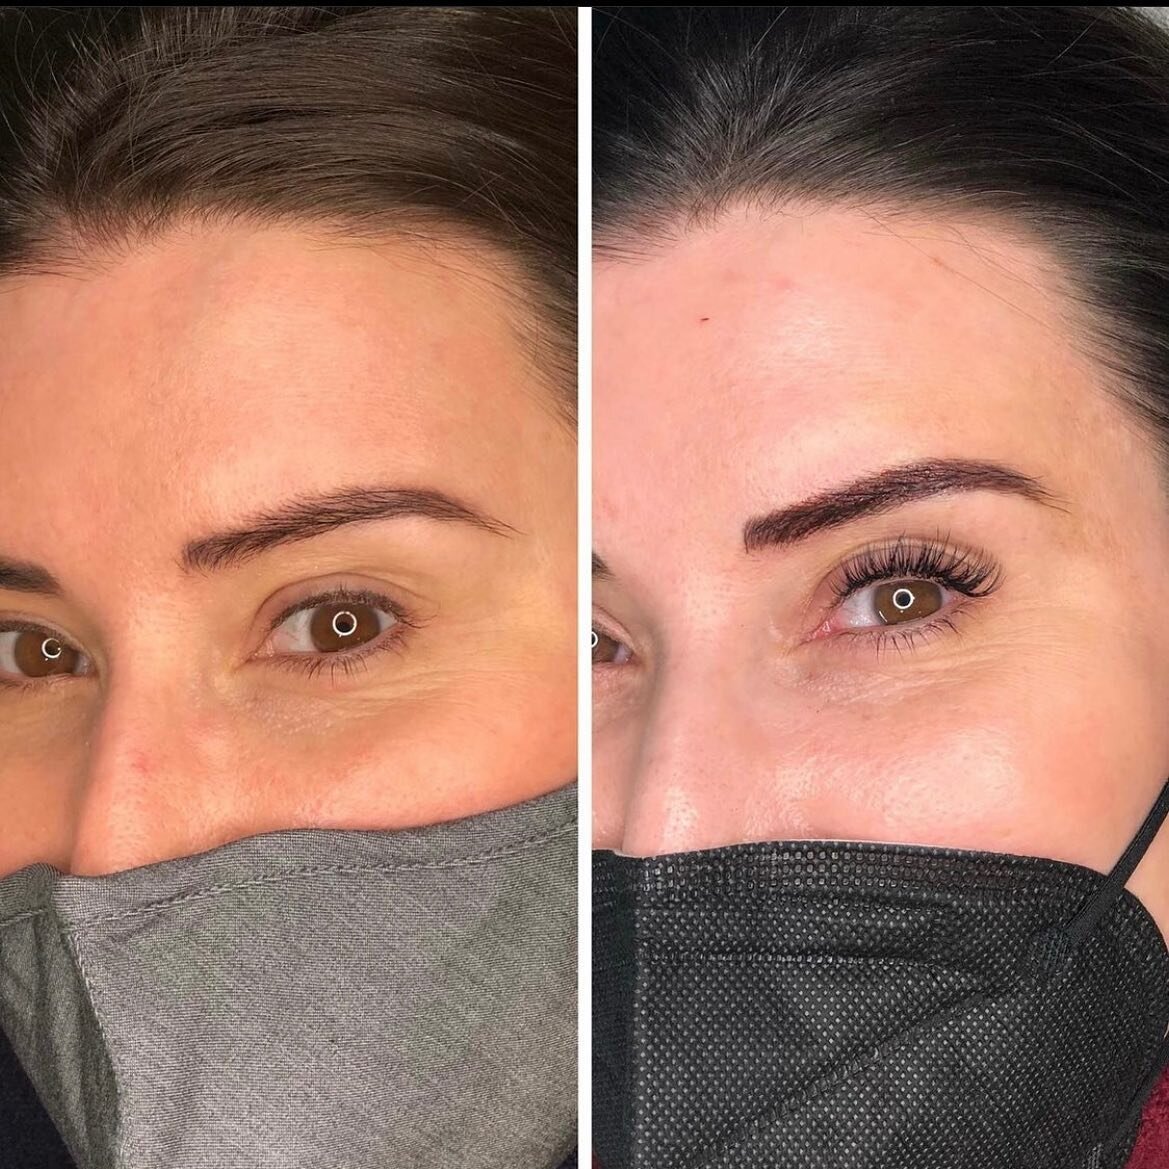 Brow refresher and lashes by our birthday girl @artistrymarkaesthetics ✨We&rsquo;re obsessed with Tawnya&rsquo;s work and this combo.

-
-
-
-
@l15salon #issaquahsalon #issaquahmicroblading #bellevuemicroblading #sammamishmicroblading #bellevuesalon 